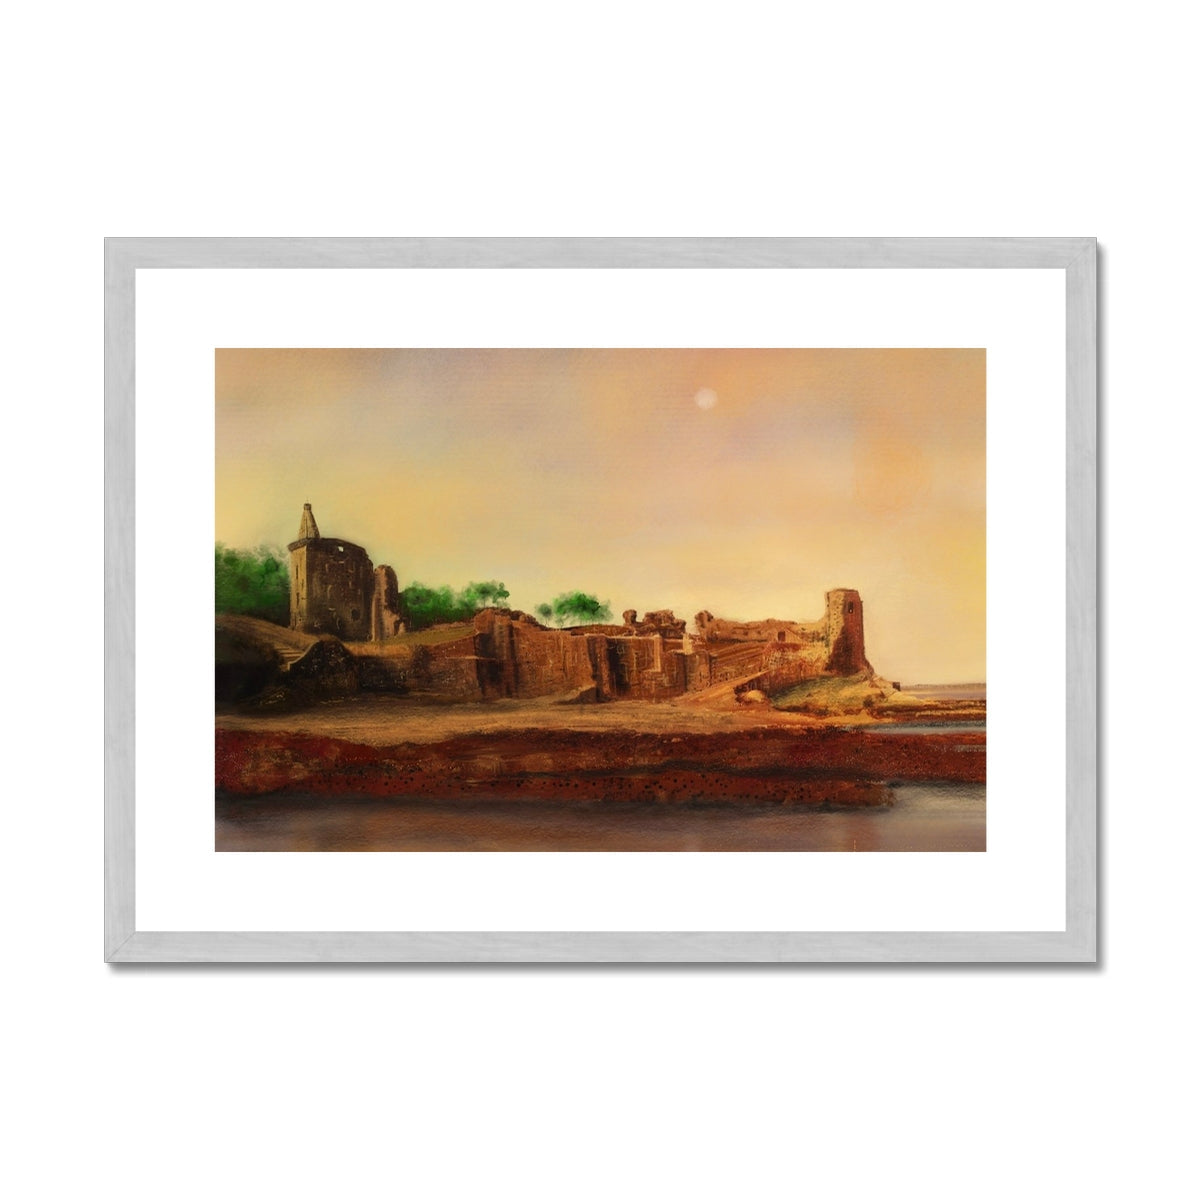 St Andrews Castle Painting | Antique Framed & Mounted Prints From Scotland-Antique Framed & Mounted Prints-Historic & Iconic Scotland Art Gallery-A2 Landscape-Silver Frame-Paintings, Prints, Homeware, Art Gifts From Scotland By Scottish Artist Kevin Hunter